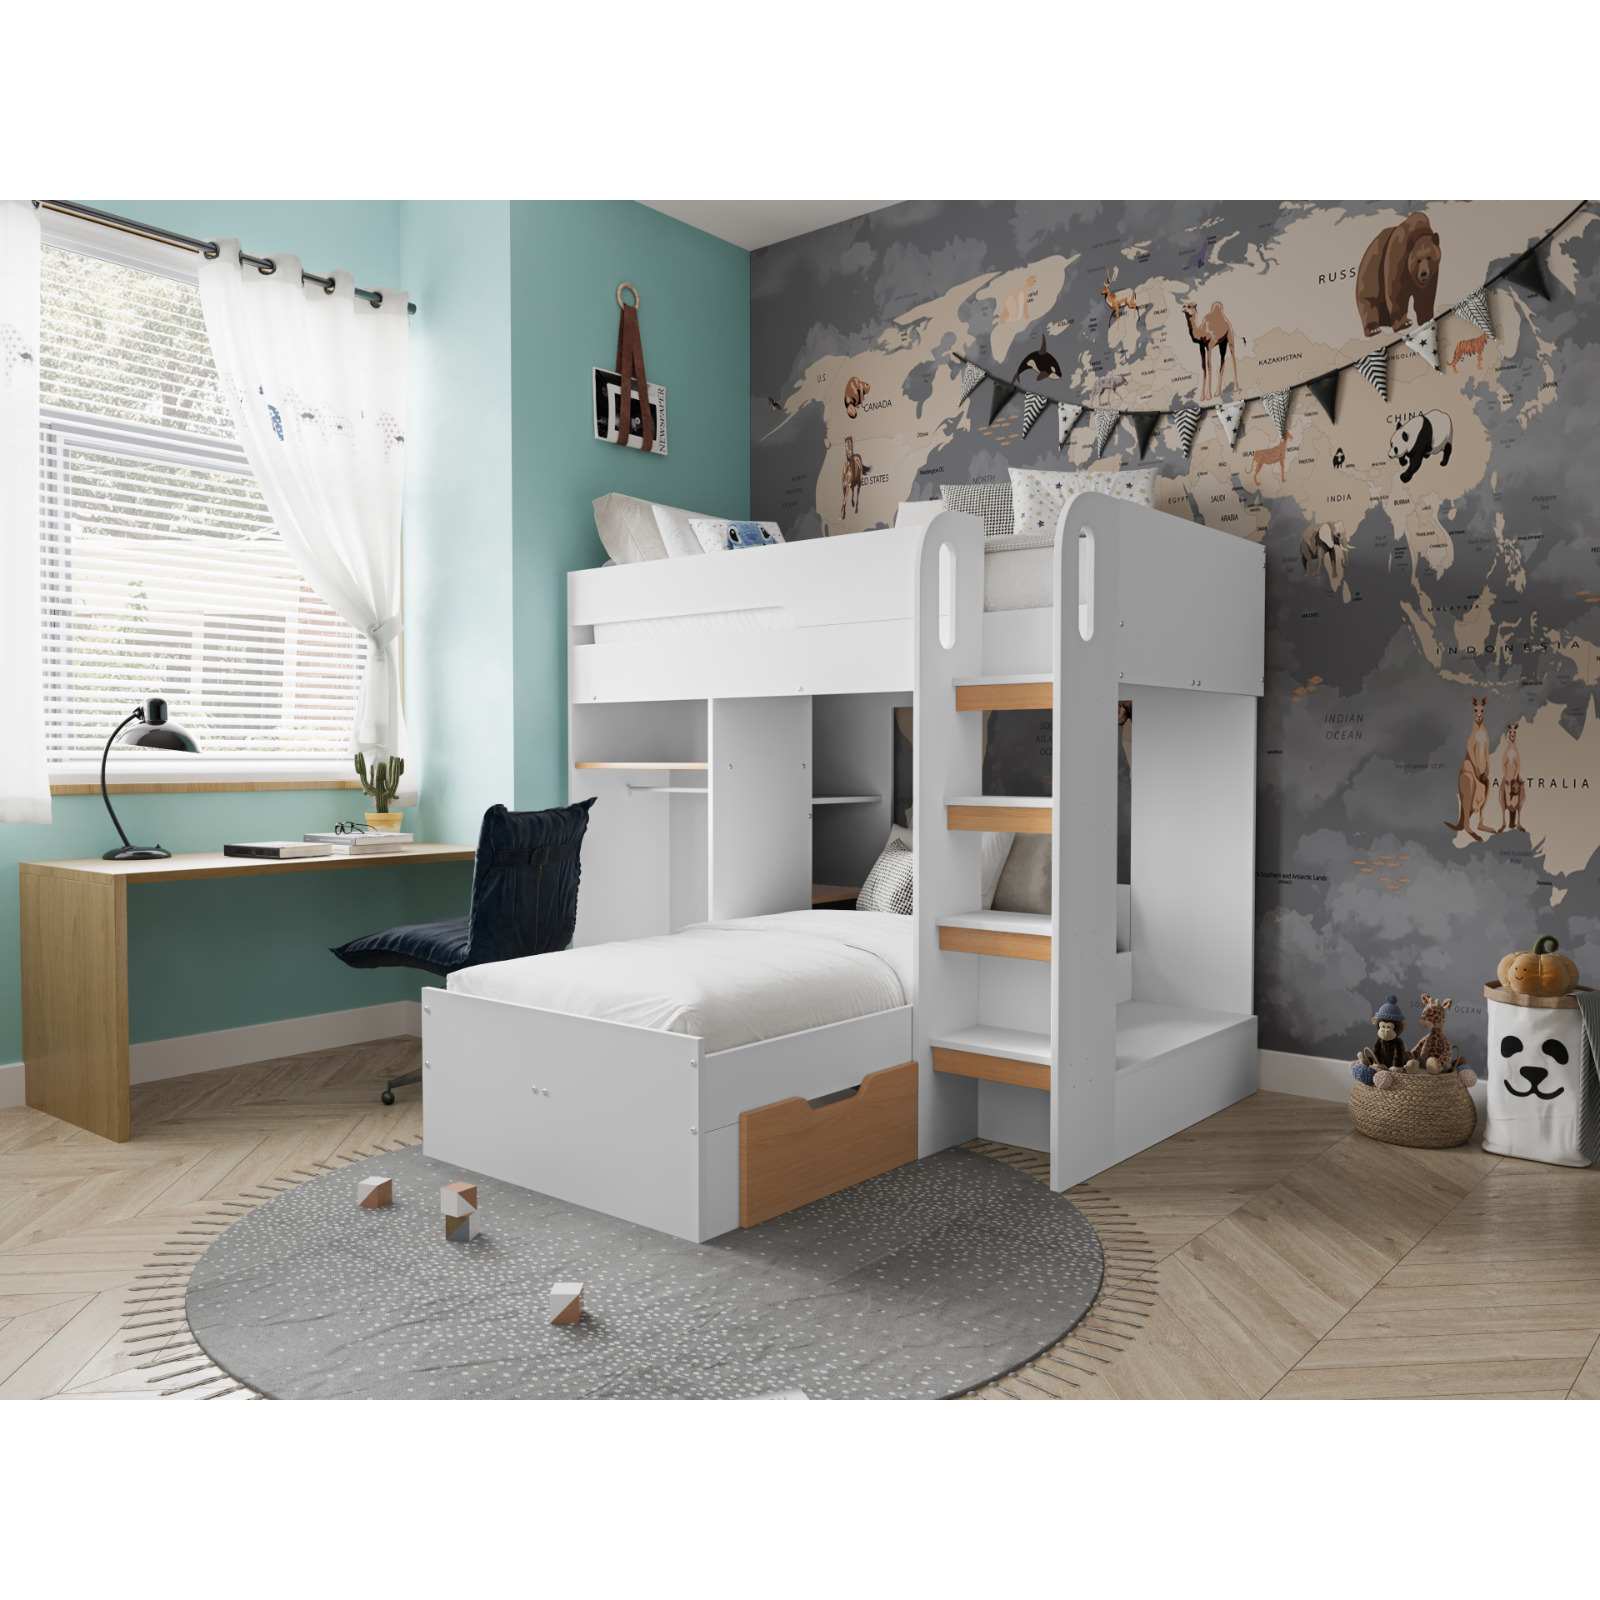 Flair Benito L Shape Adaptable Bunk Bed White And Oak - image 1